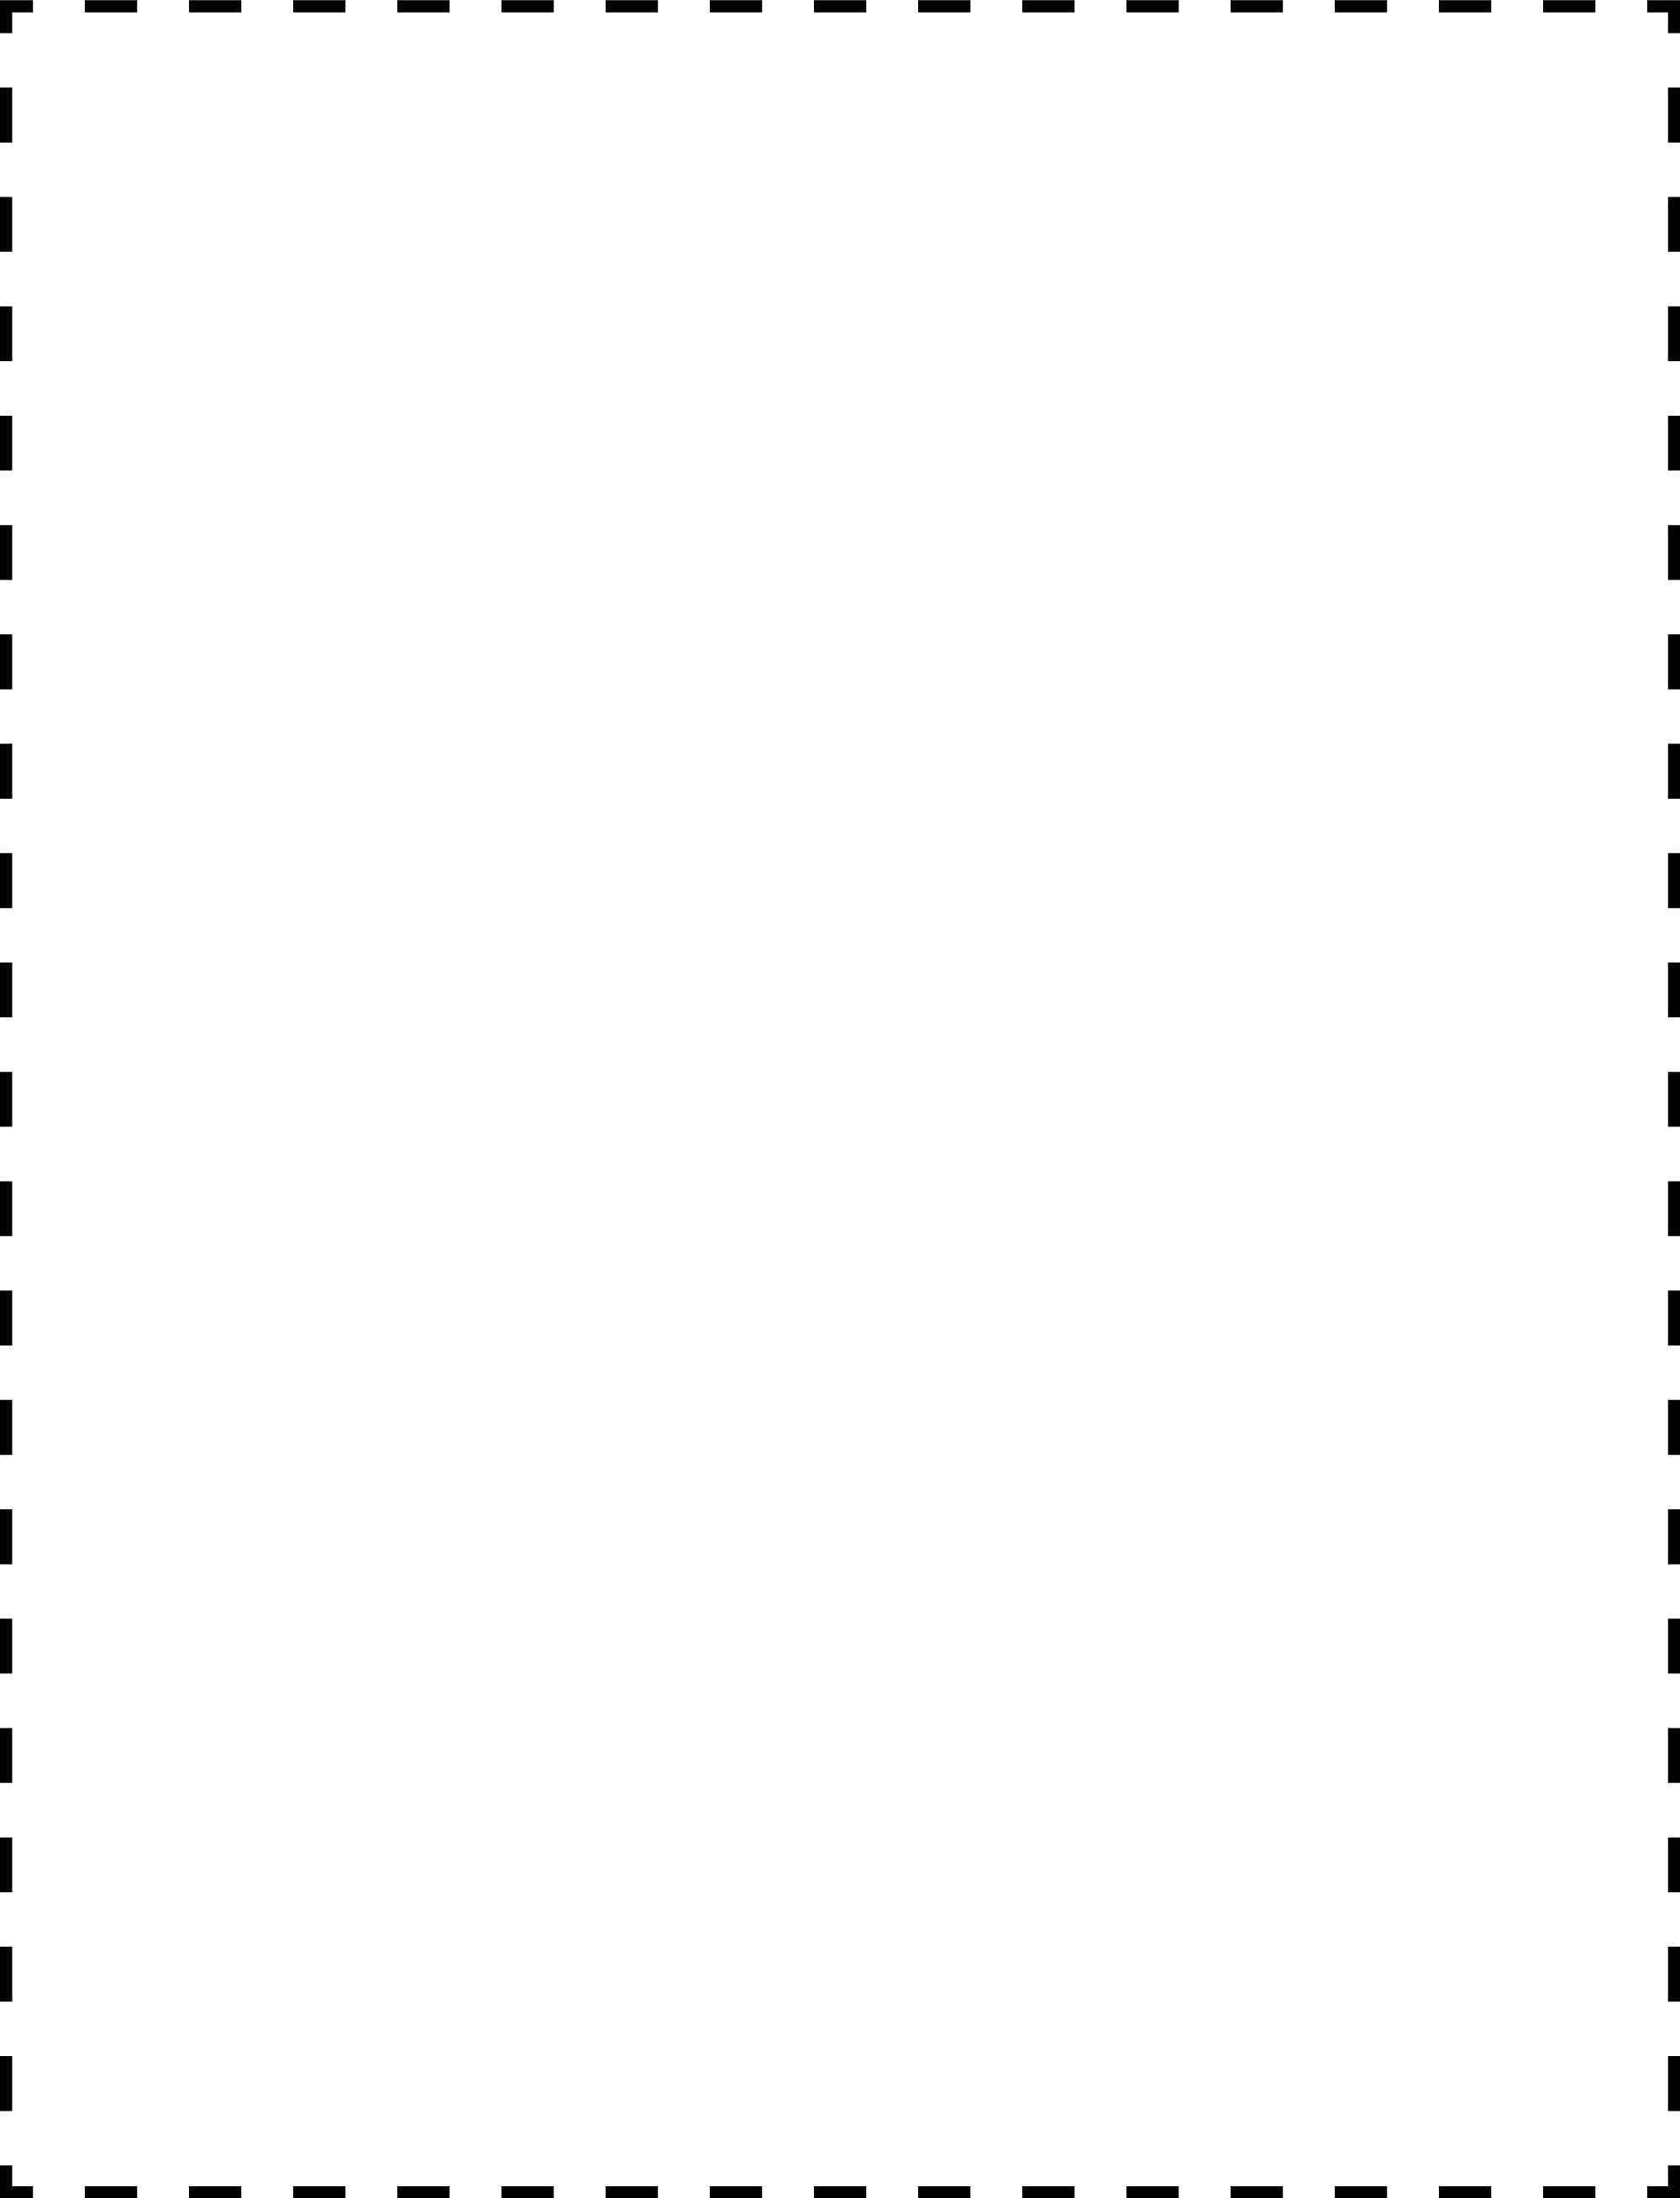 2302-coupon-outline-4x5-k.png